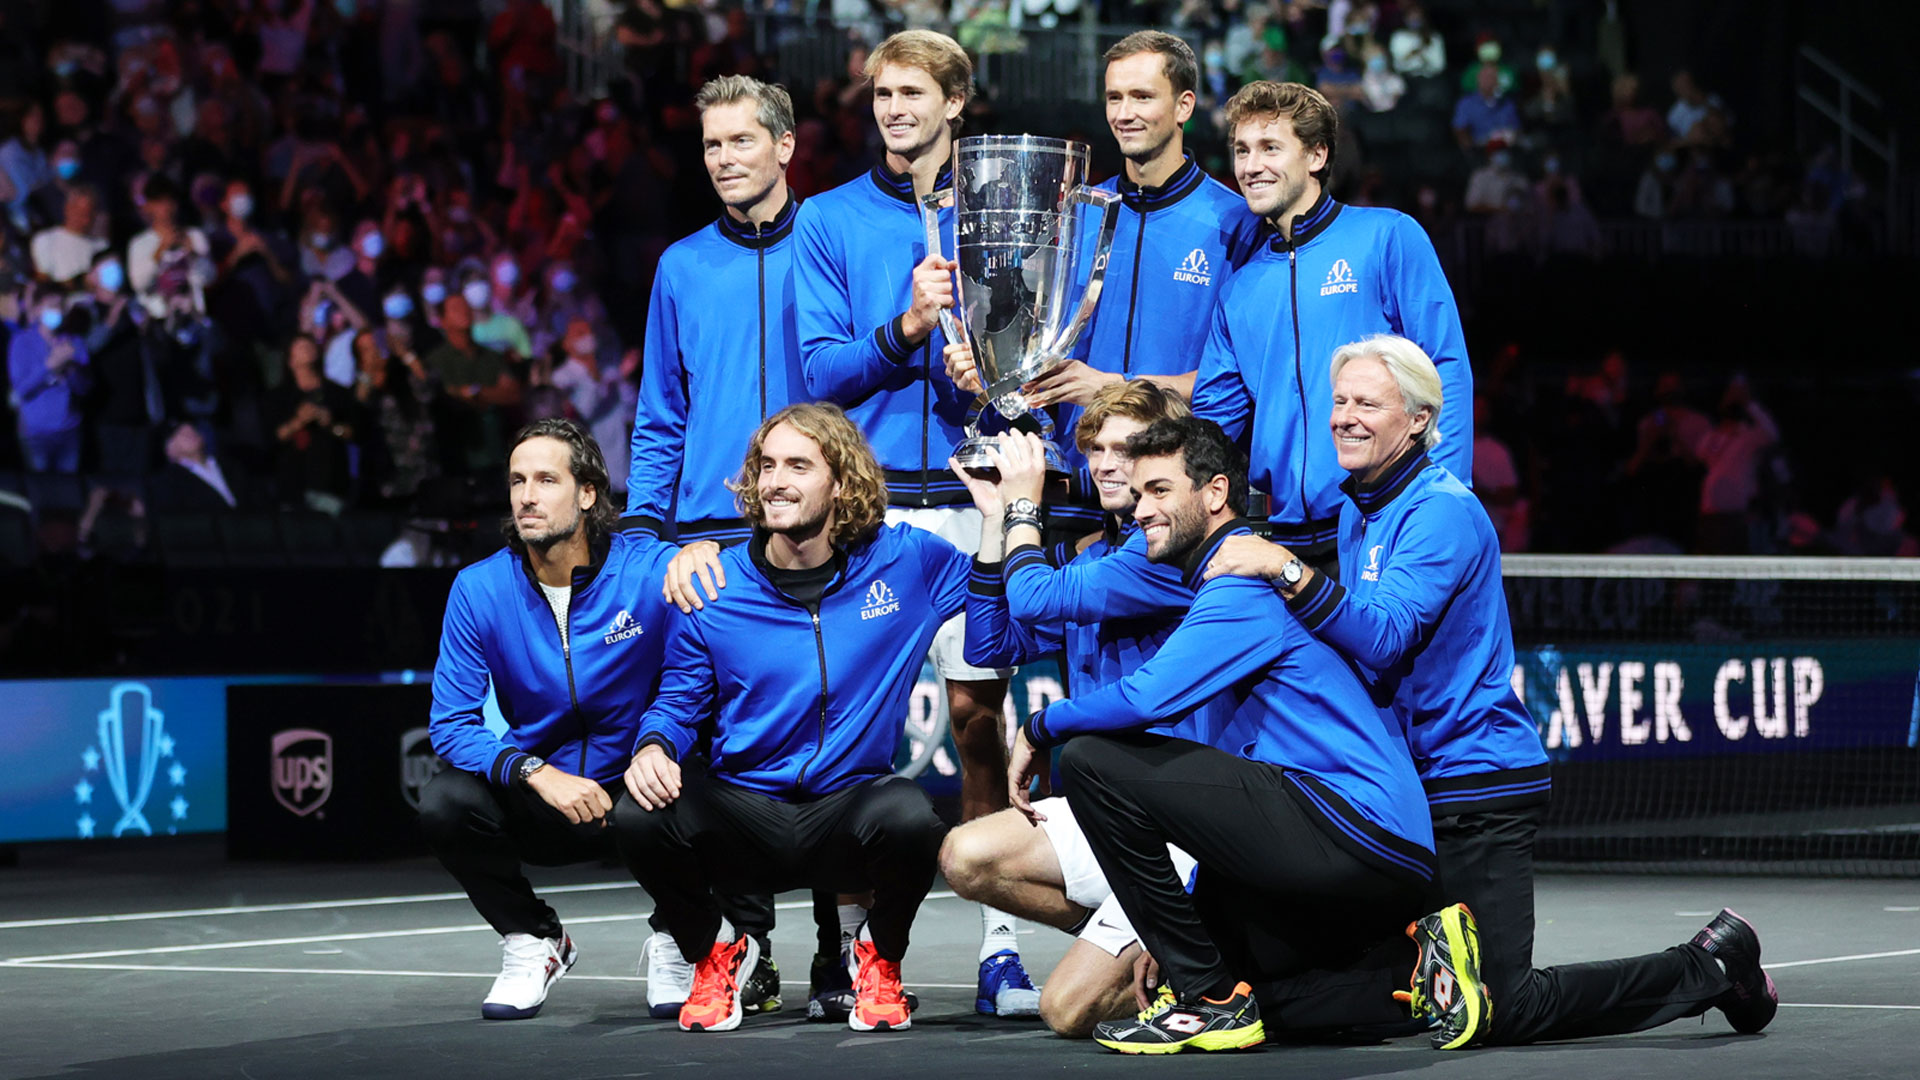 Laver Cup 2021, Boston - Sept 24-26 2021 - Page 6 FAO59iVVQAIi2Ua?format=jpg&name=large